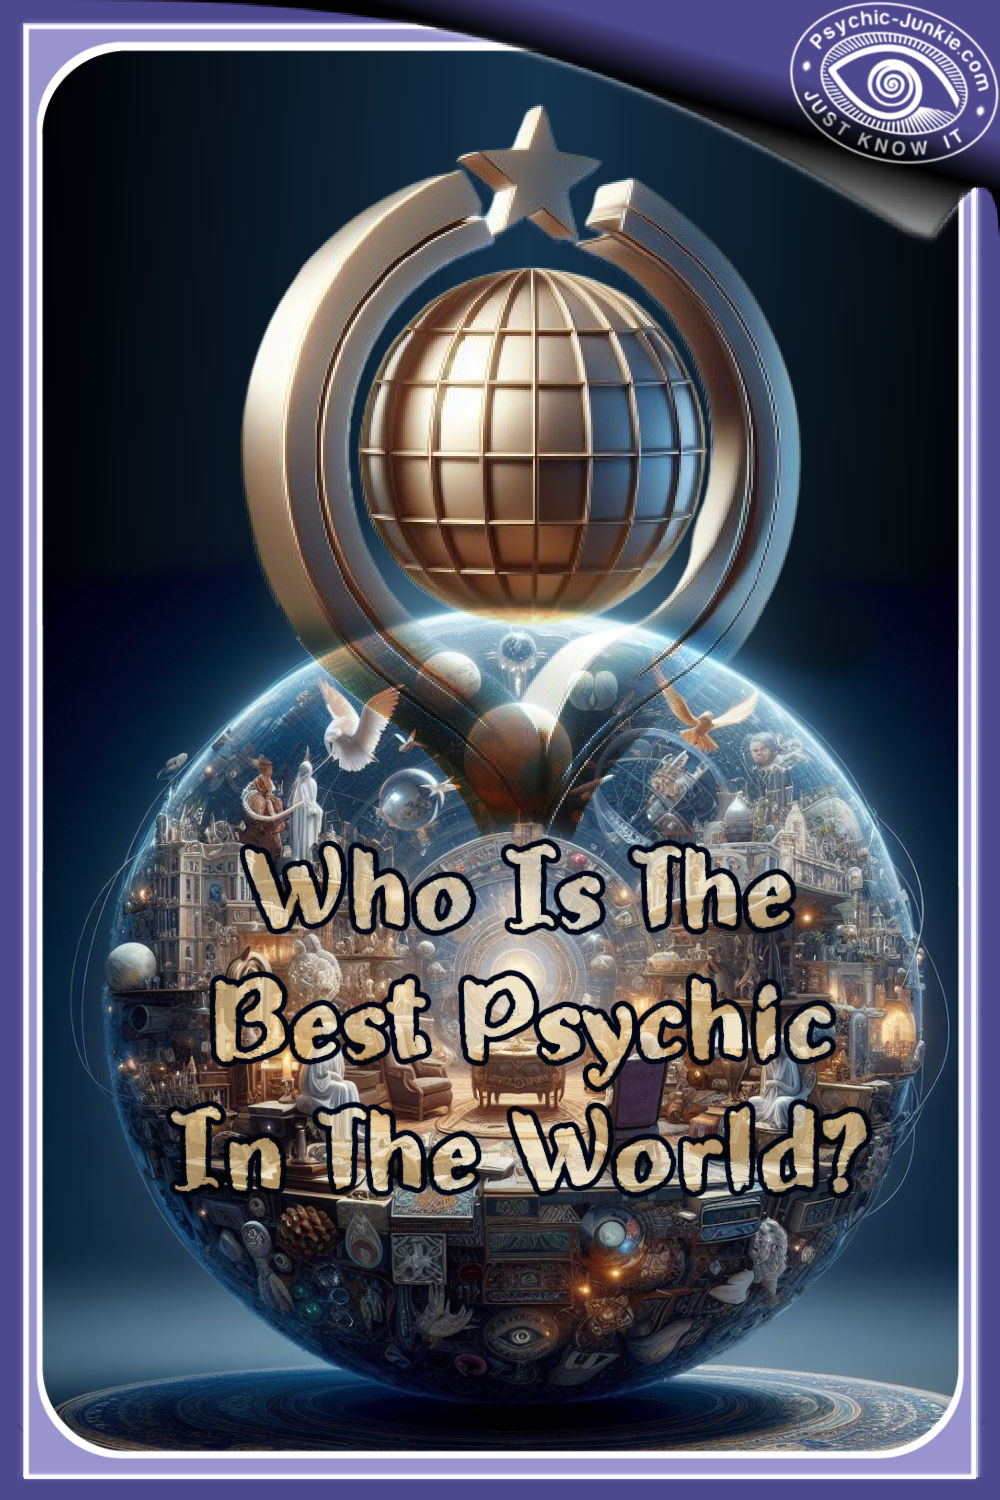 Who Do You Think is the Best Psychic in the World?